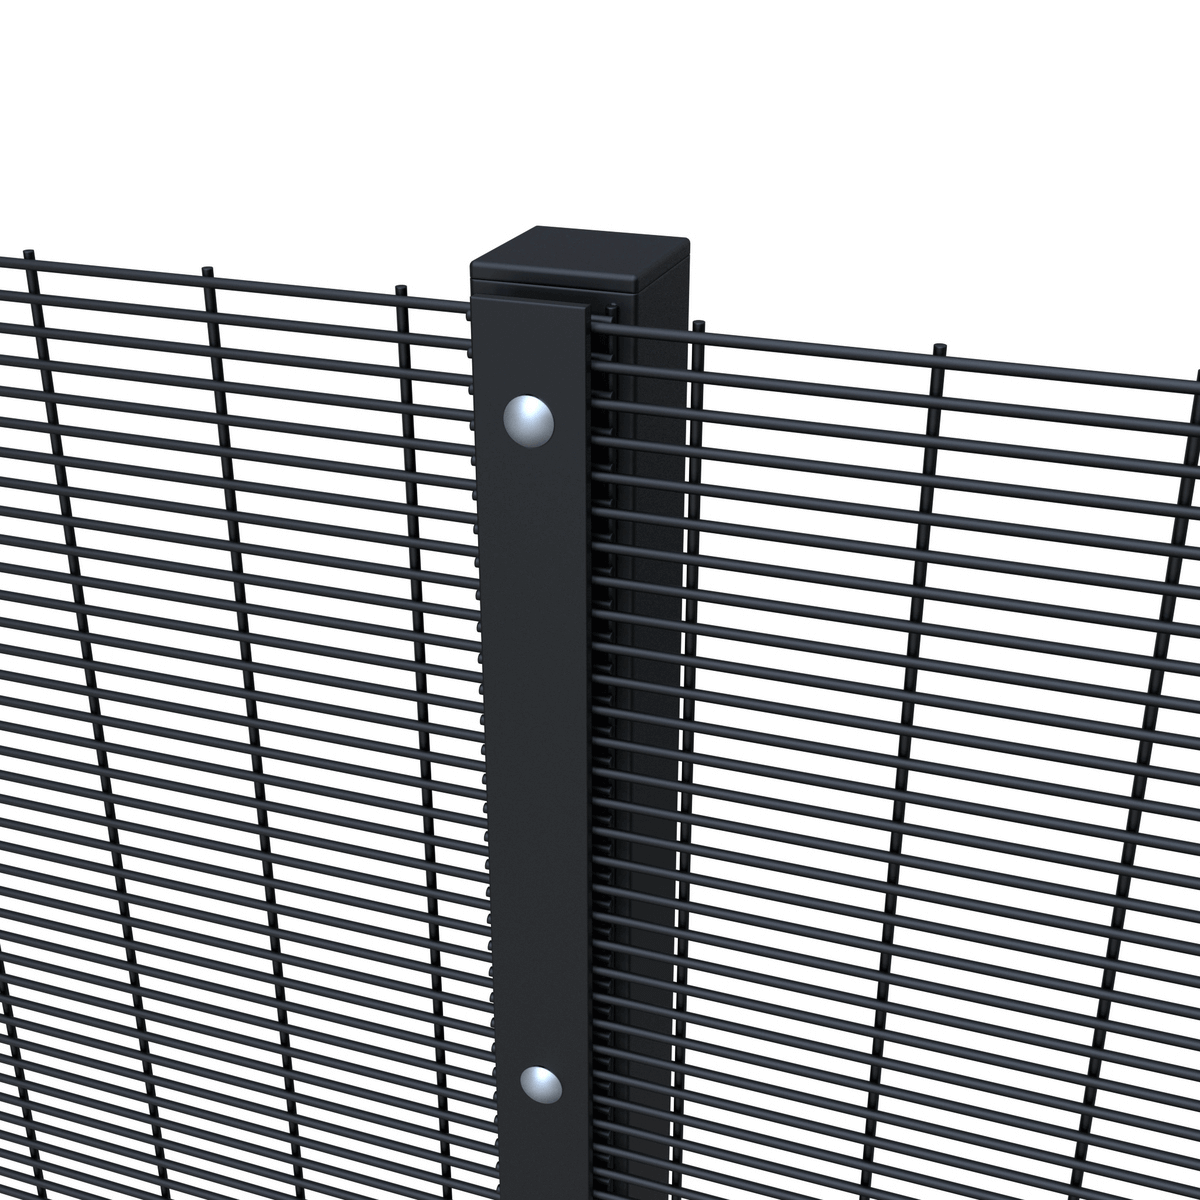 Keep Your Property Safe from Unwanted Visitors with the Anti-Throwing Fence.